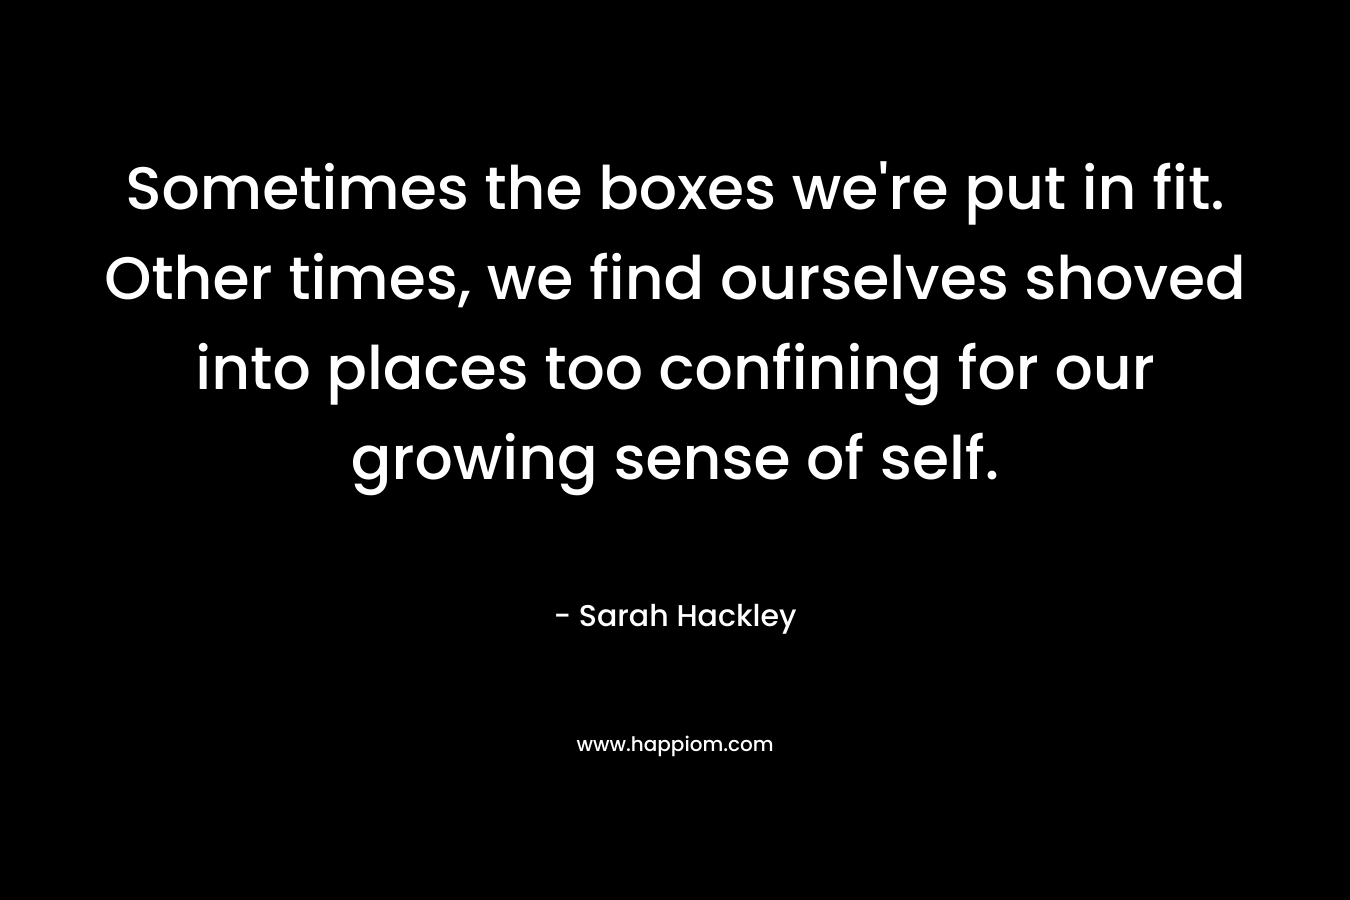 Sometimes the boxes we’re put in fit. Other times, we find ourselves shoved into places too confining for our growing sense of self. – Sarah Hackley